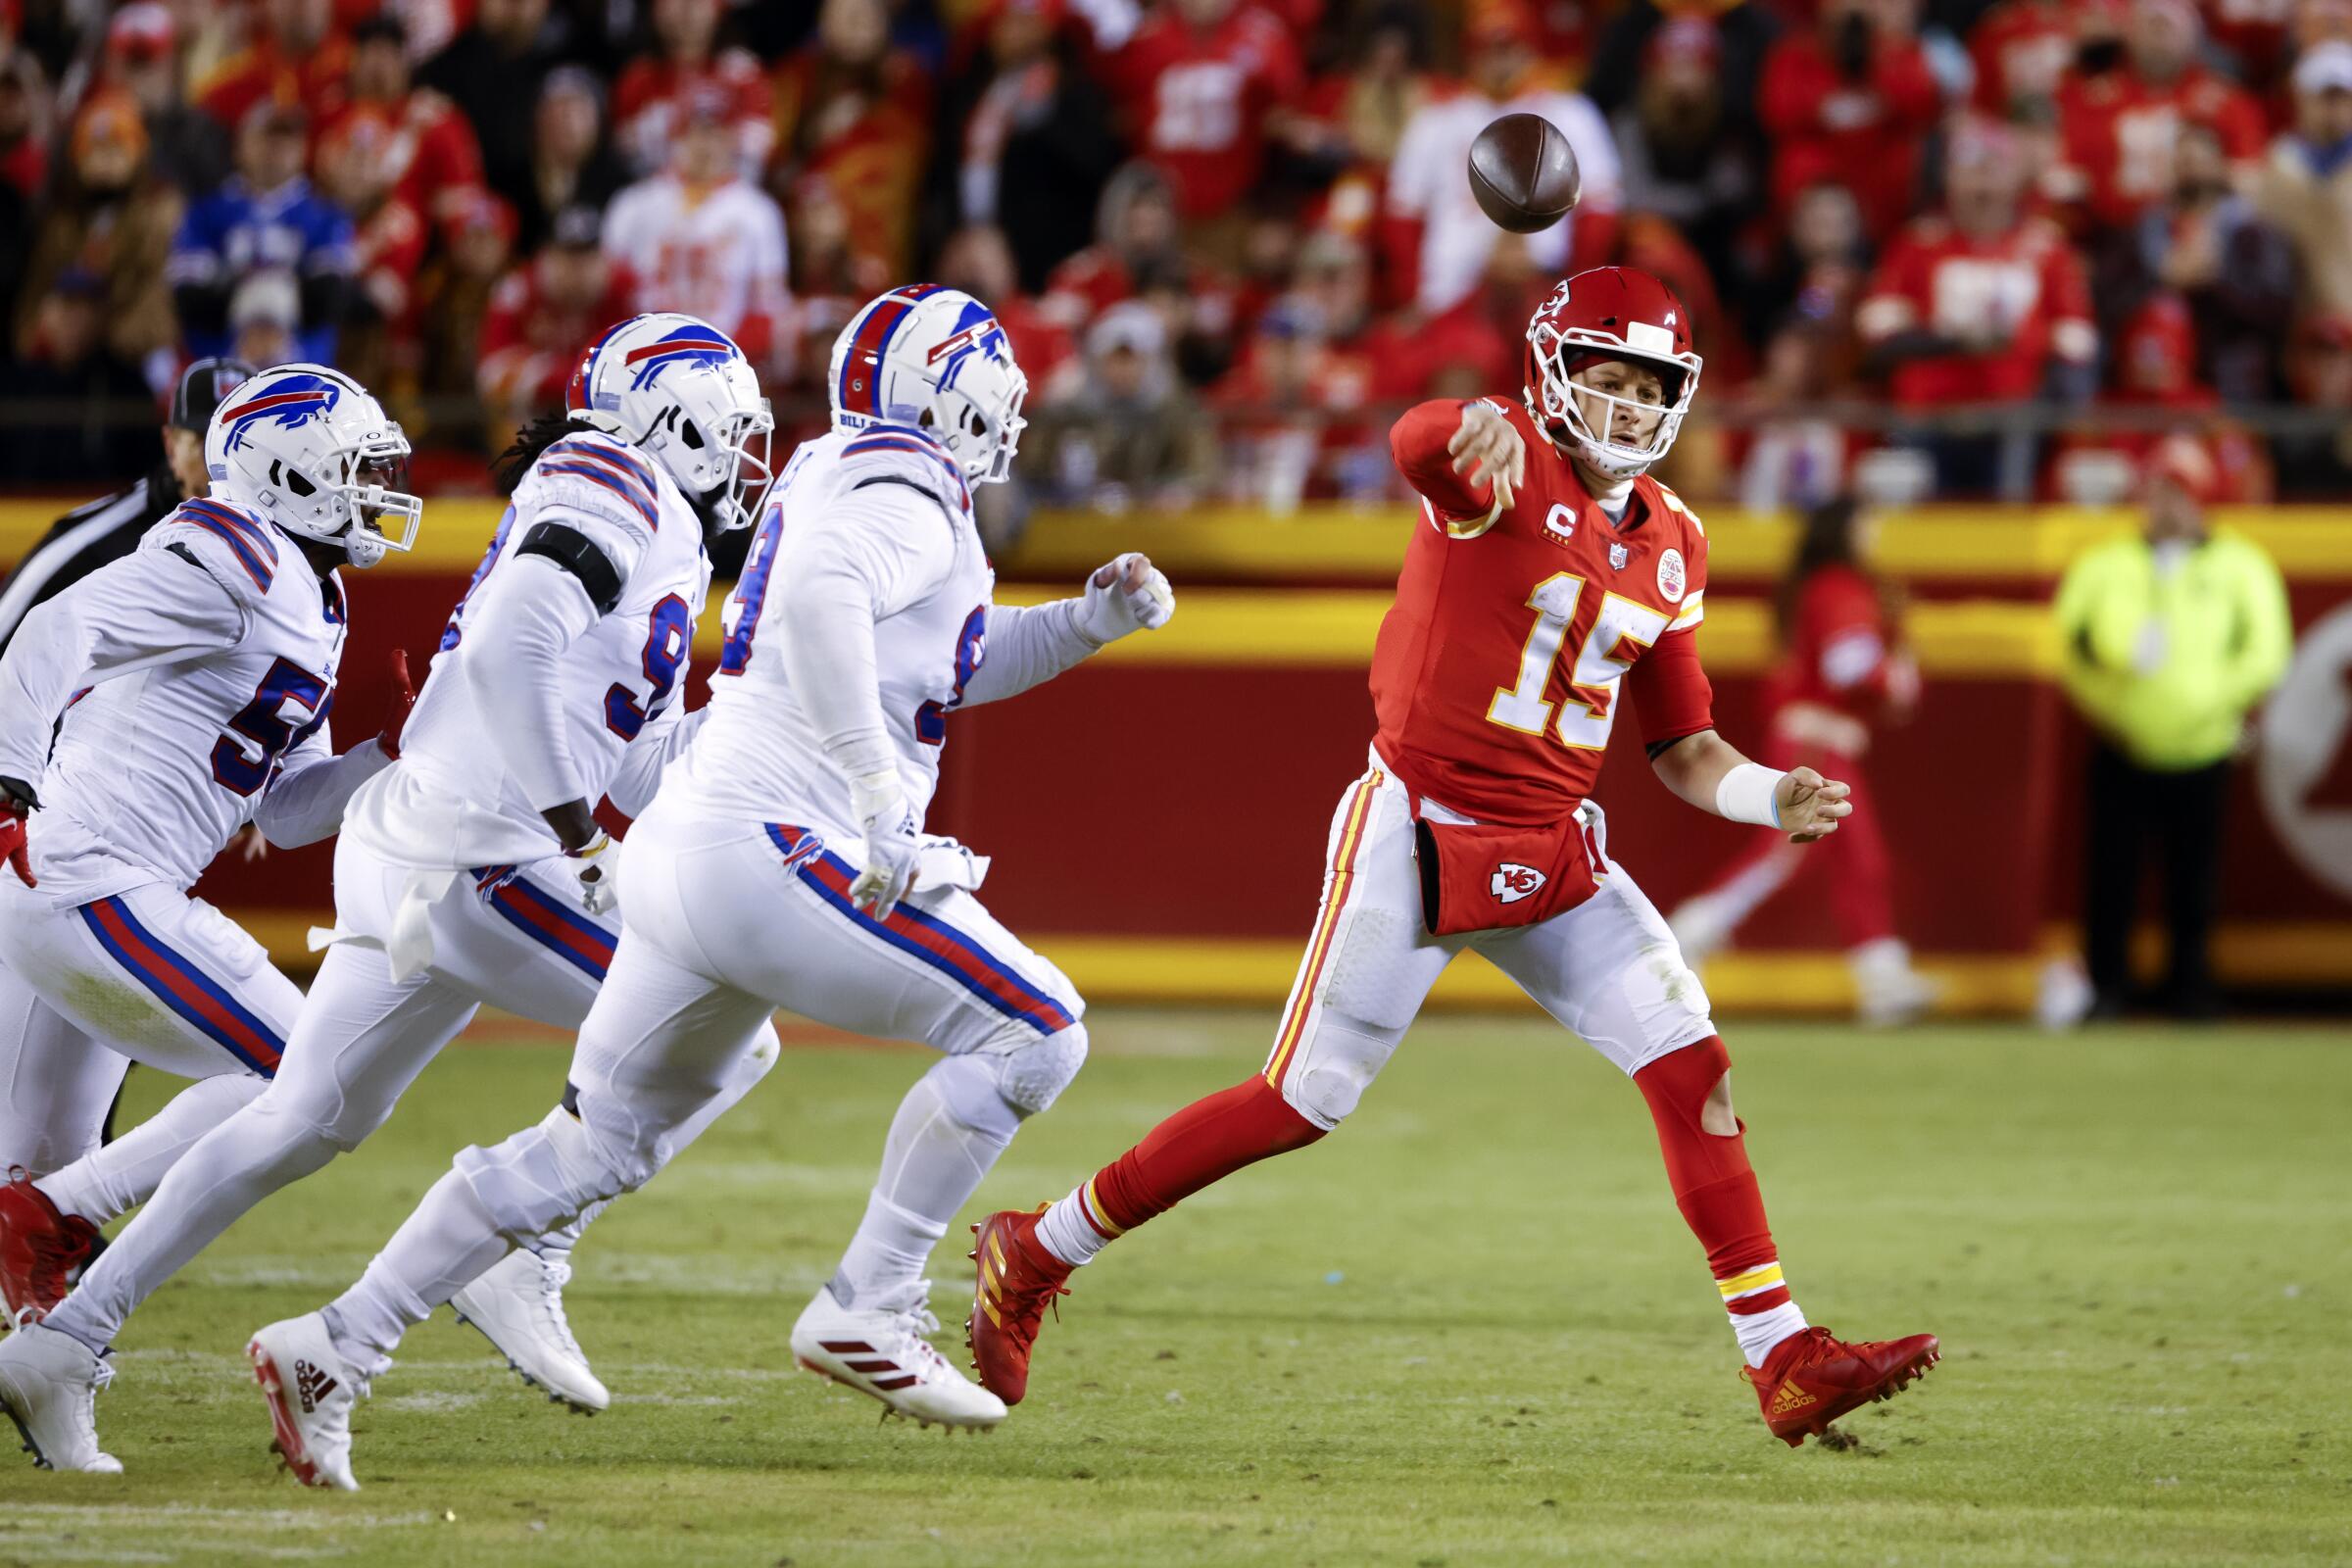 Chiefs quarterback Patrick Mahomes (15) throws a pass under pressure from the Bills defense in the playoffs last season.